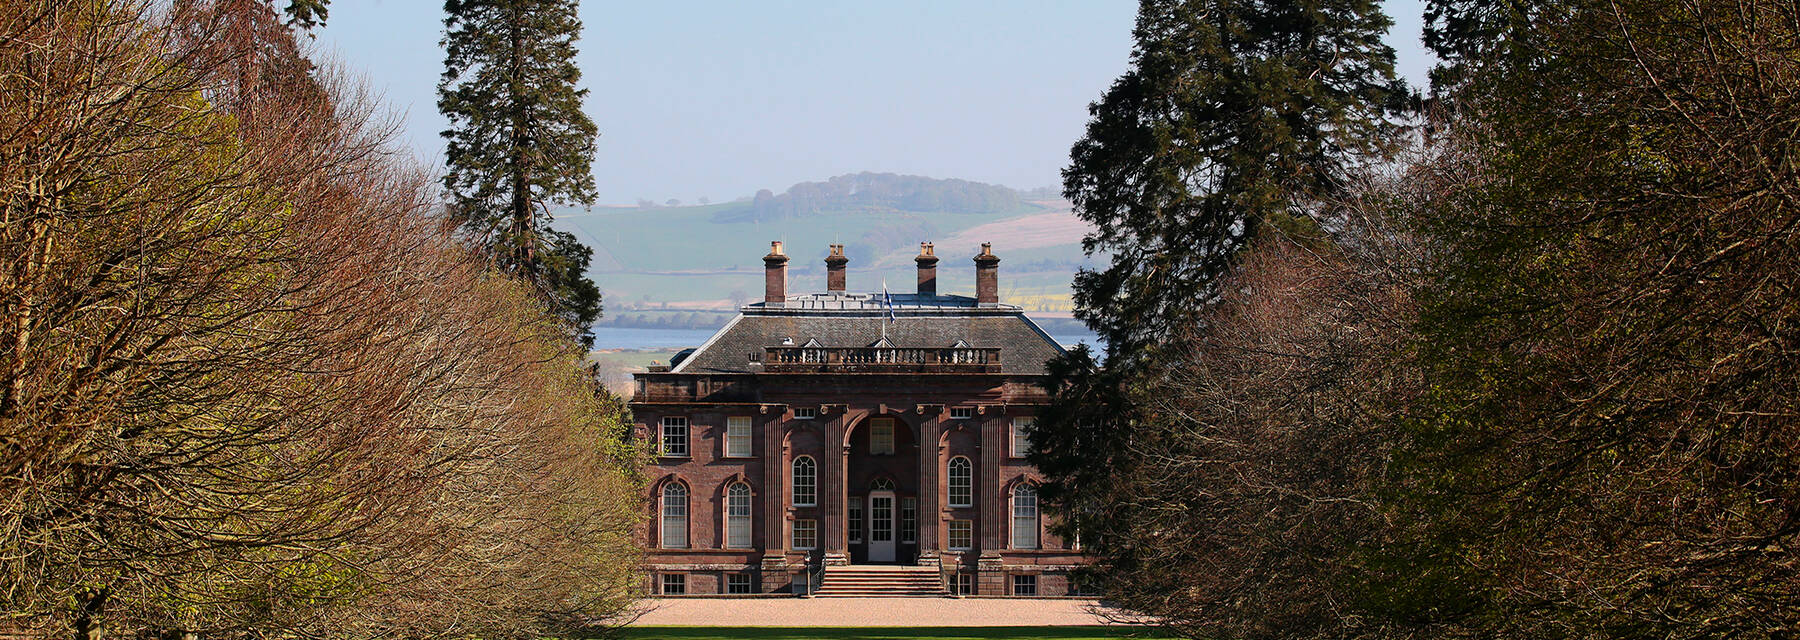 A view of a grand Georgian country house, seen from a wide grassy avenue of beech trees. Hills can be seen across the estuary in the background.